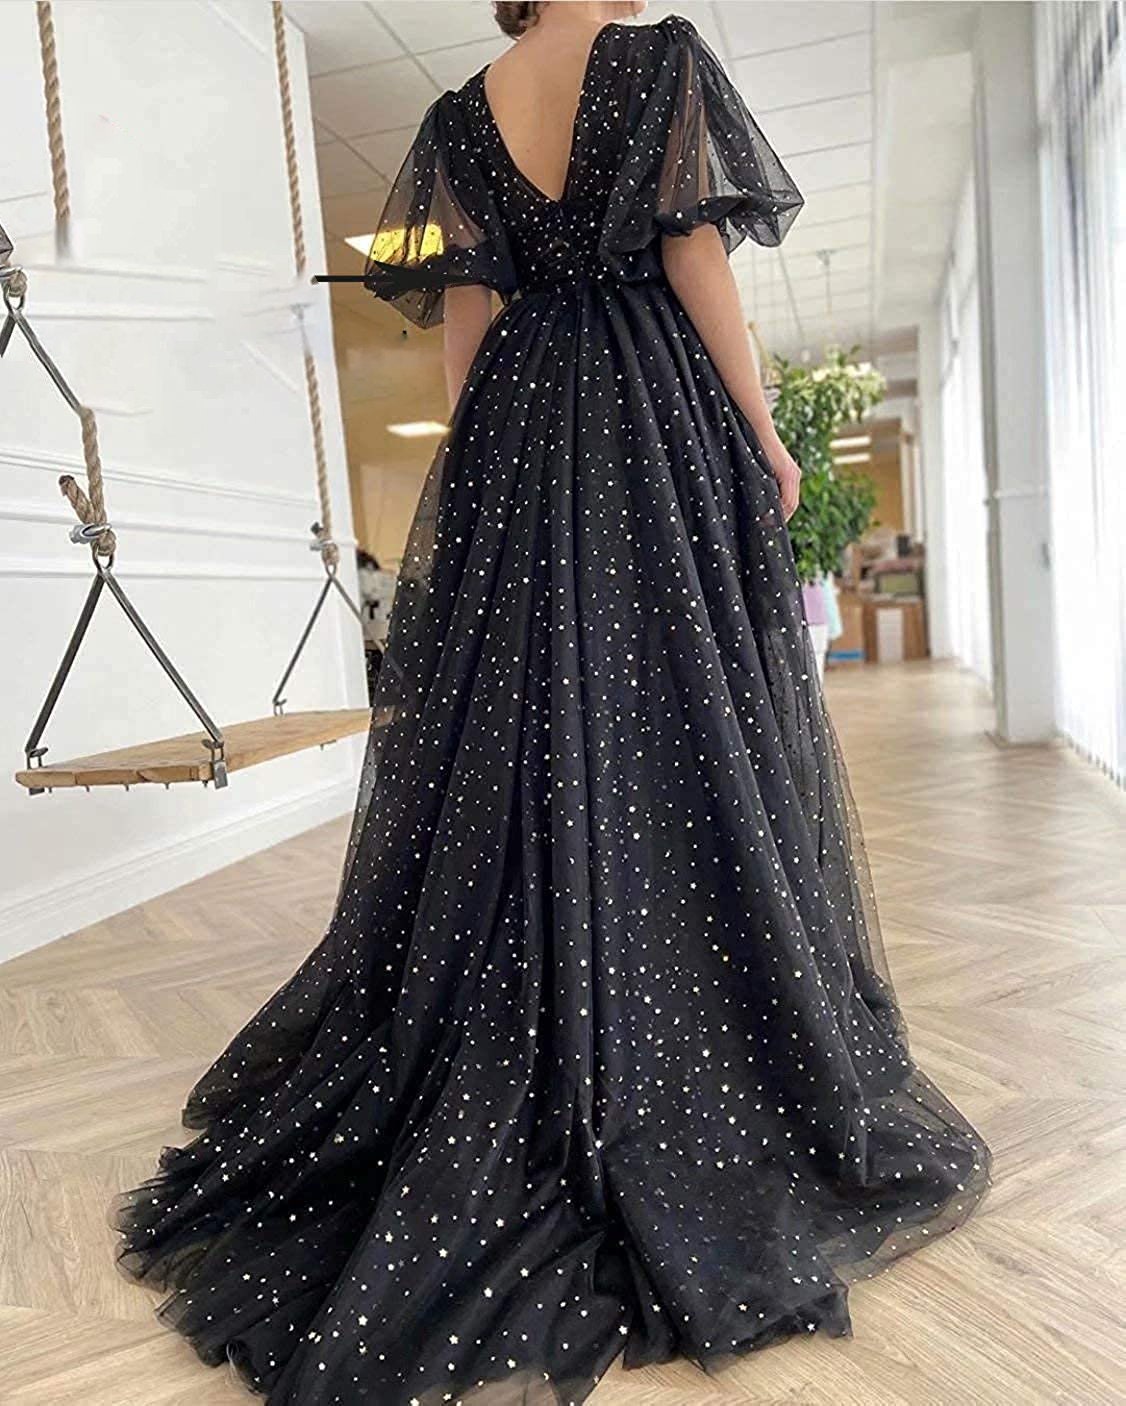 Starred Tulle Prom dress,Puffy Sleeve, Princess Off The Shoulder Maxi Dress Bridesmaid Dress, Plus Size free shipping